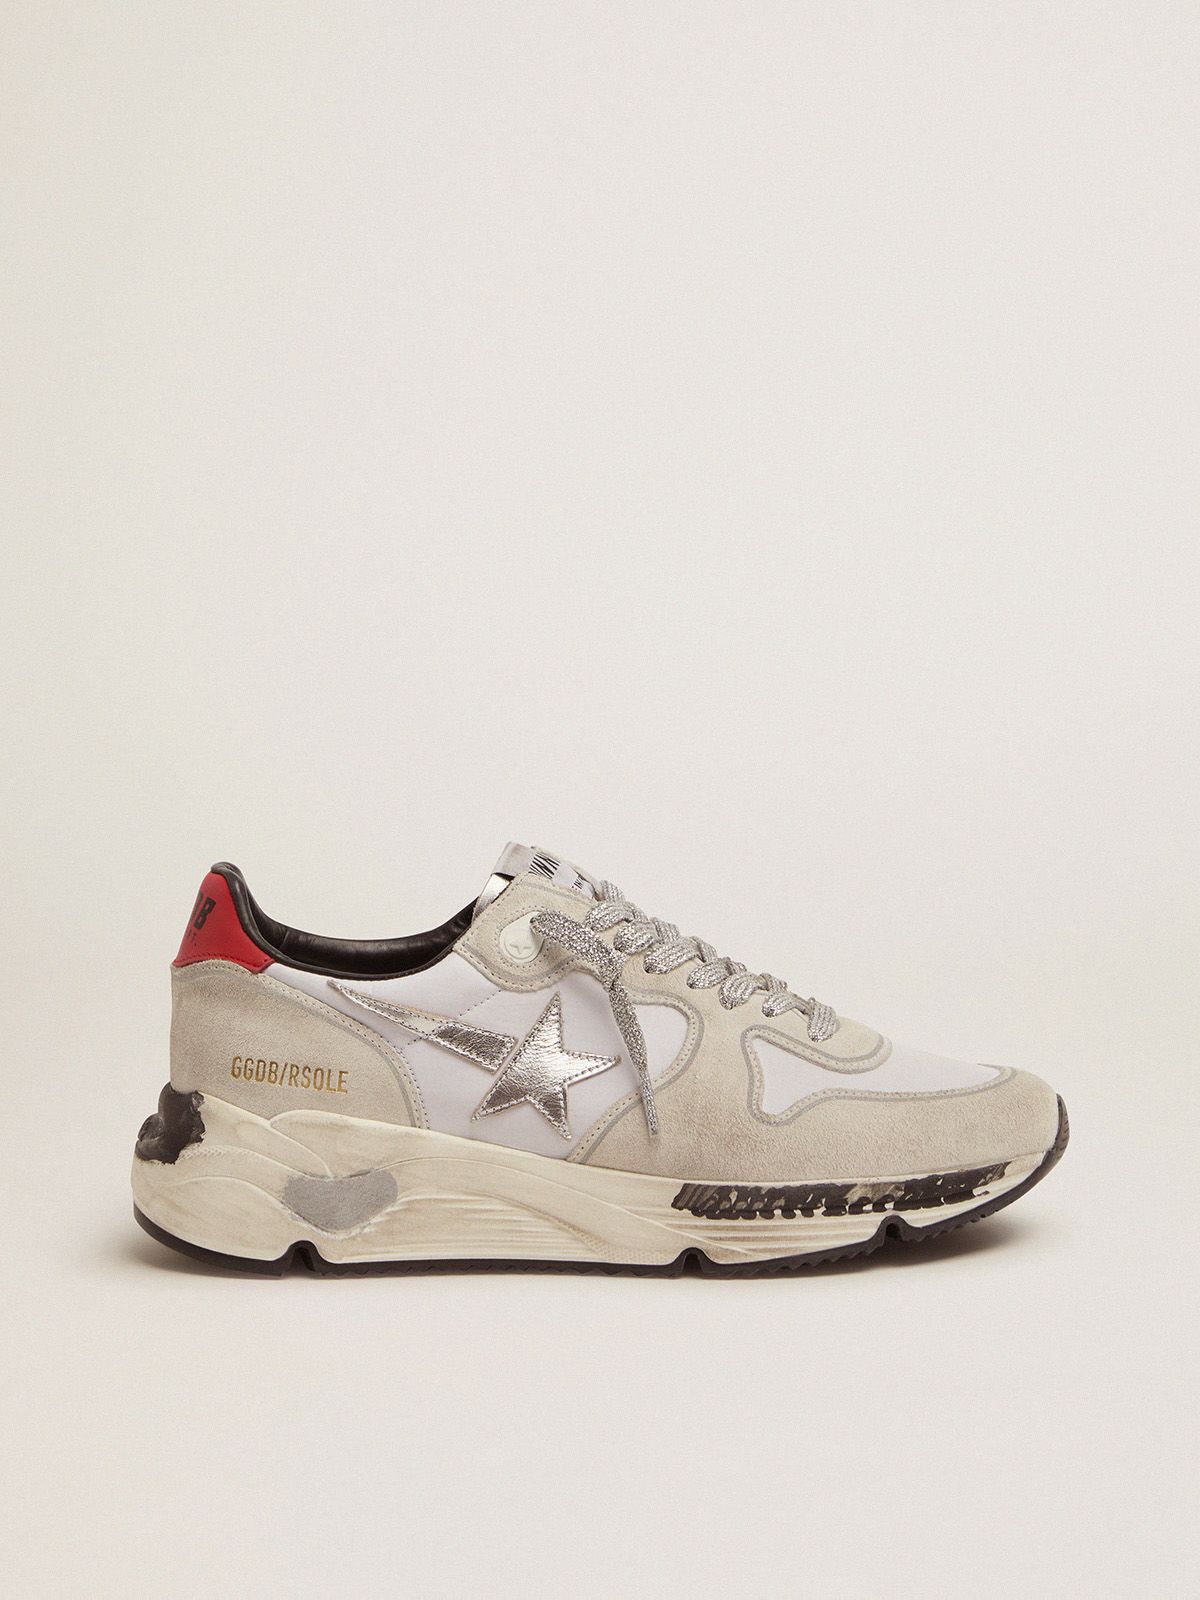 Running Sole sneakers with red heel tab and silver star | 